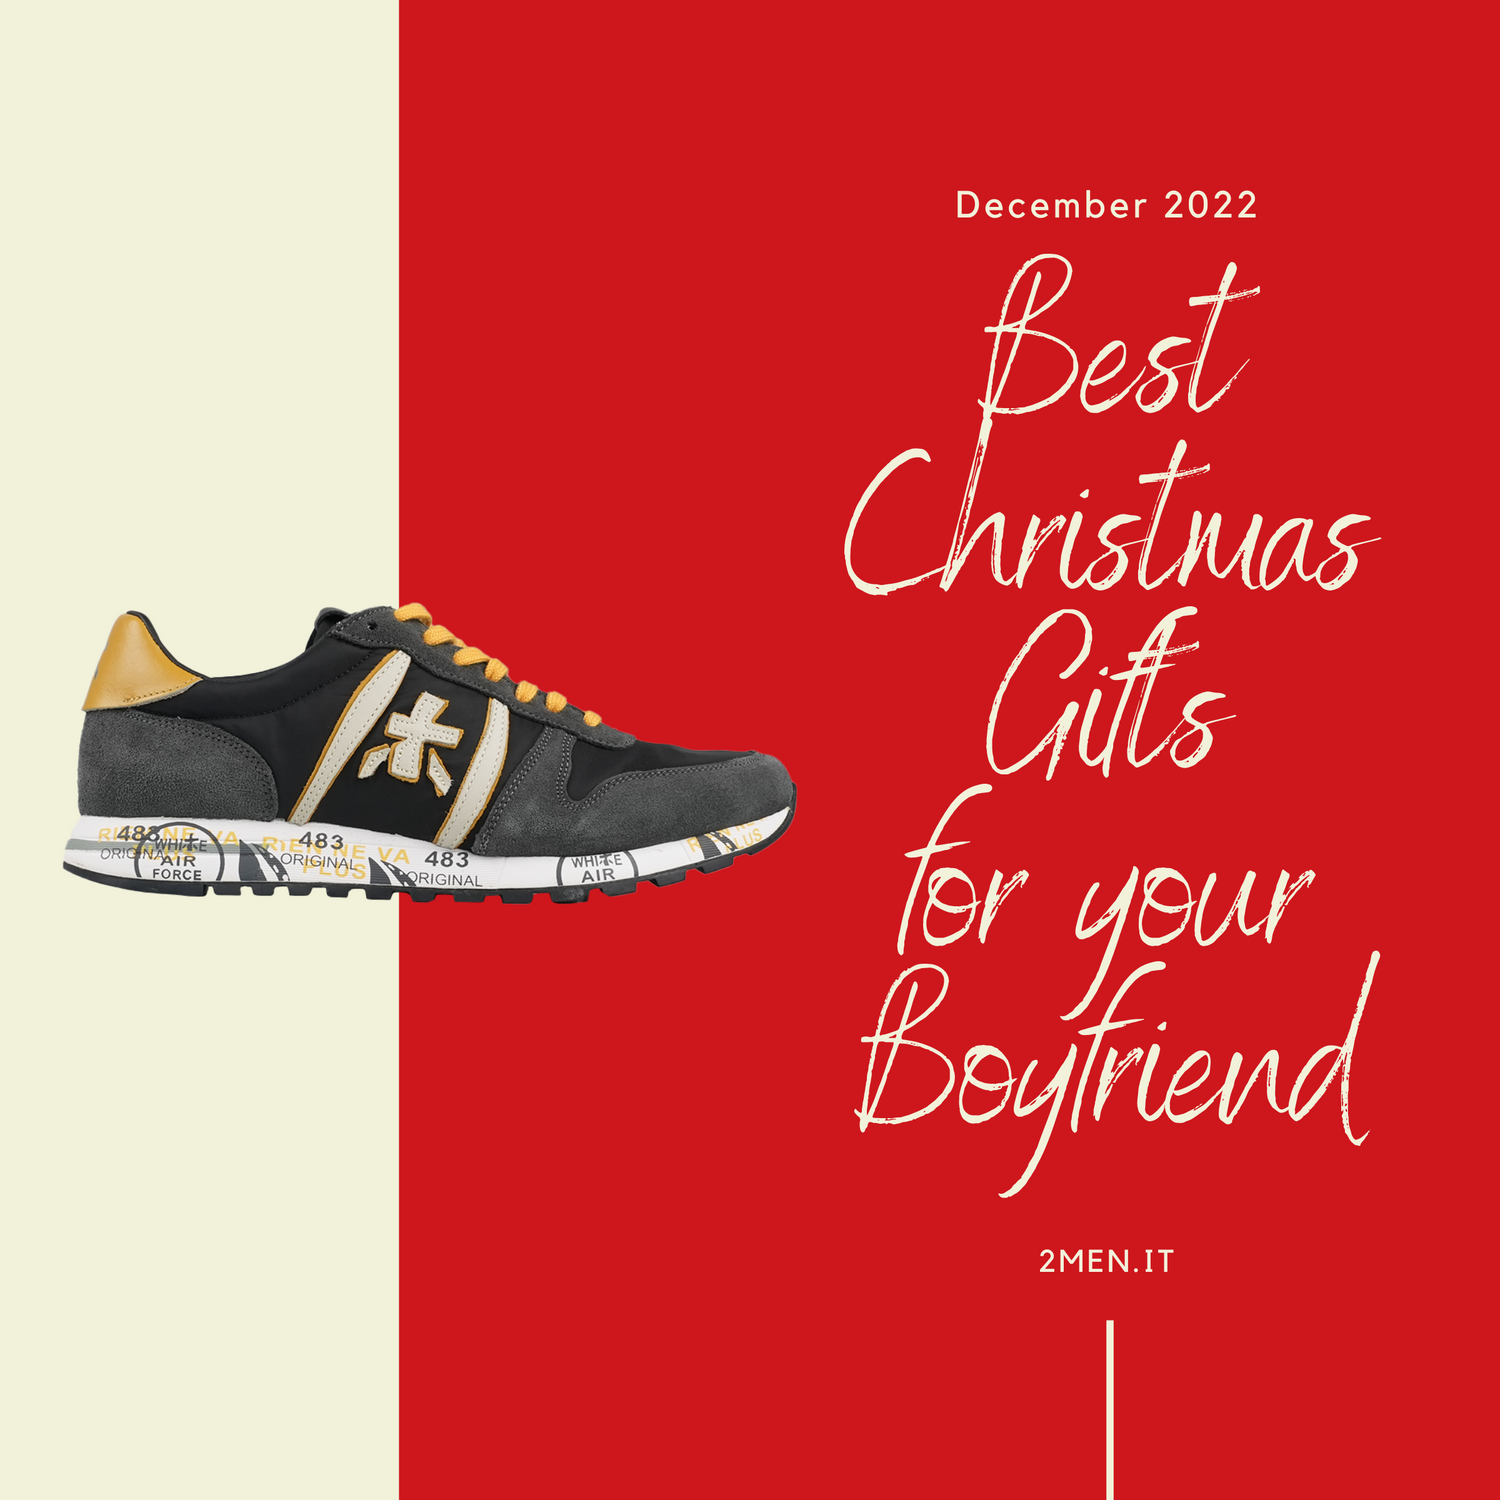 Best Christmas Gifts for your Boyfriend